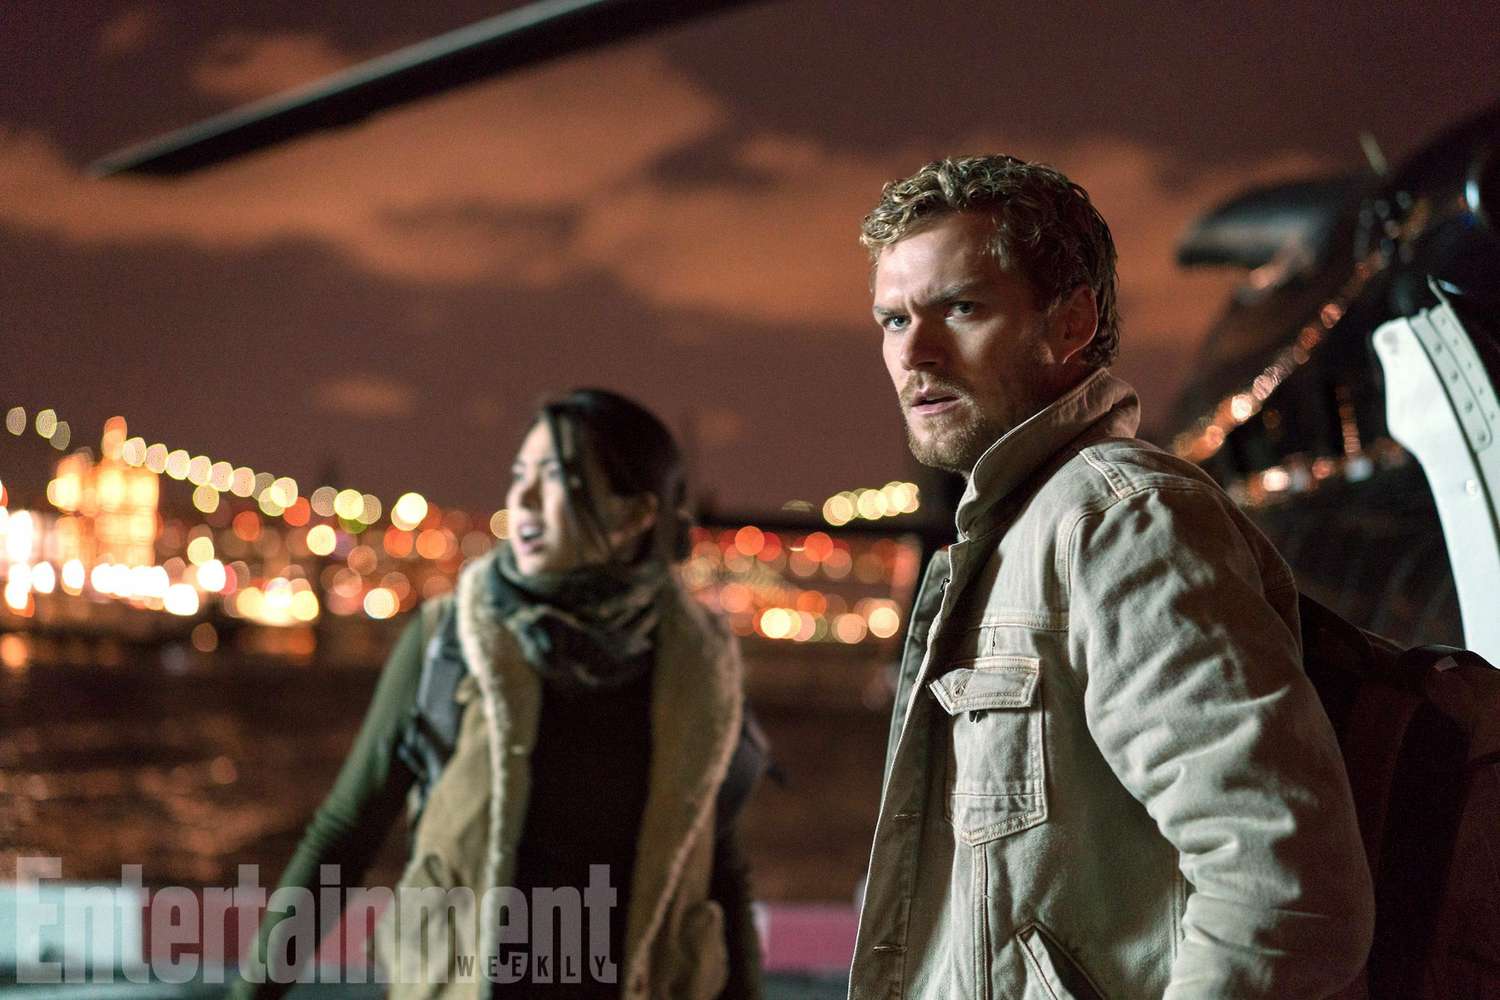 Jessica Henwick as Colleen Wing and Finn Jones as Iron Fist